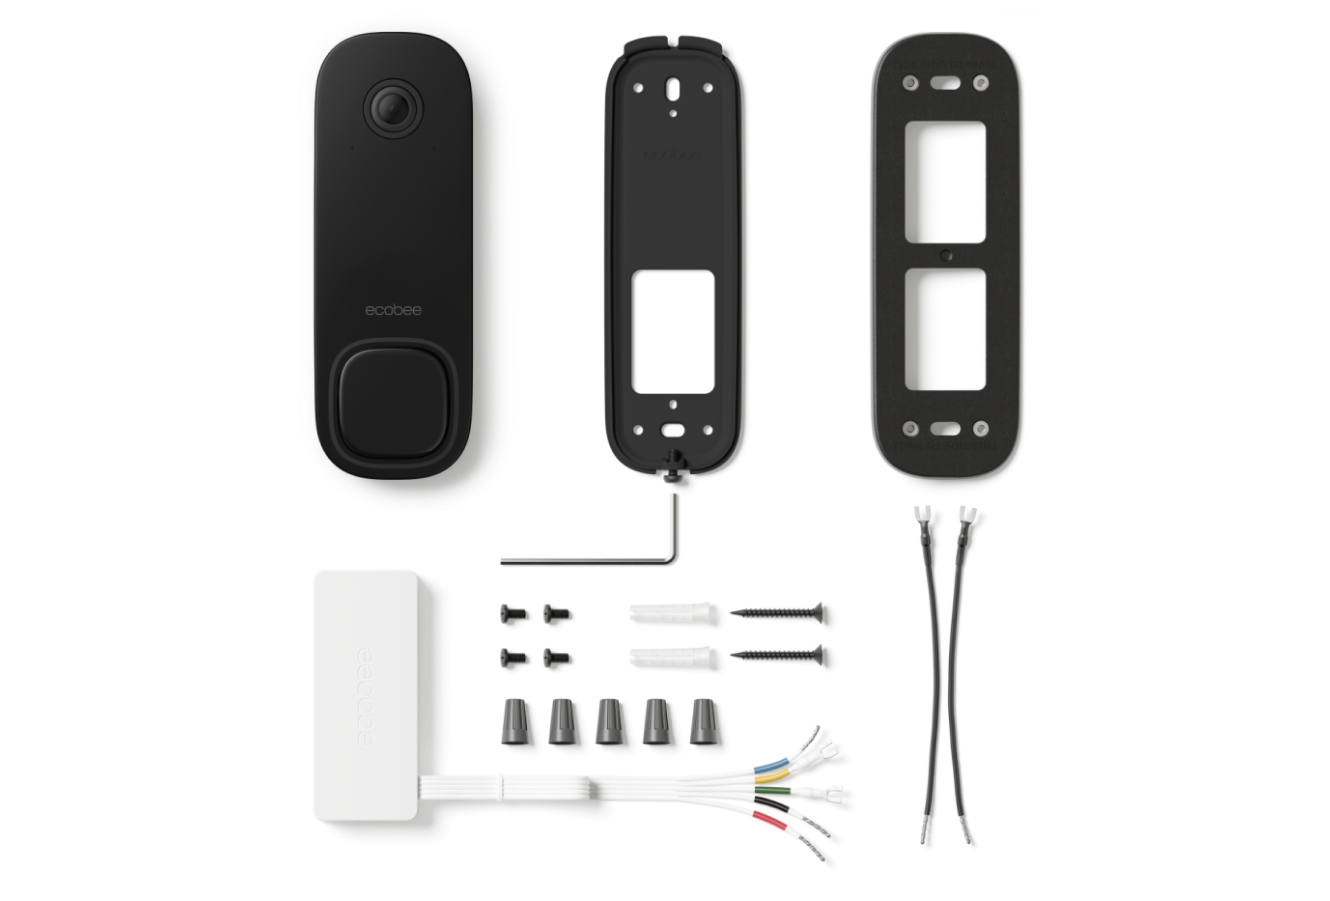 all the individual parts included in the box of ecobee smart doorbell camera